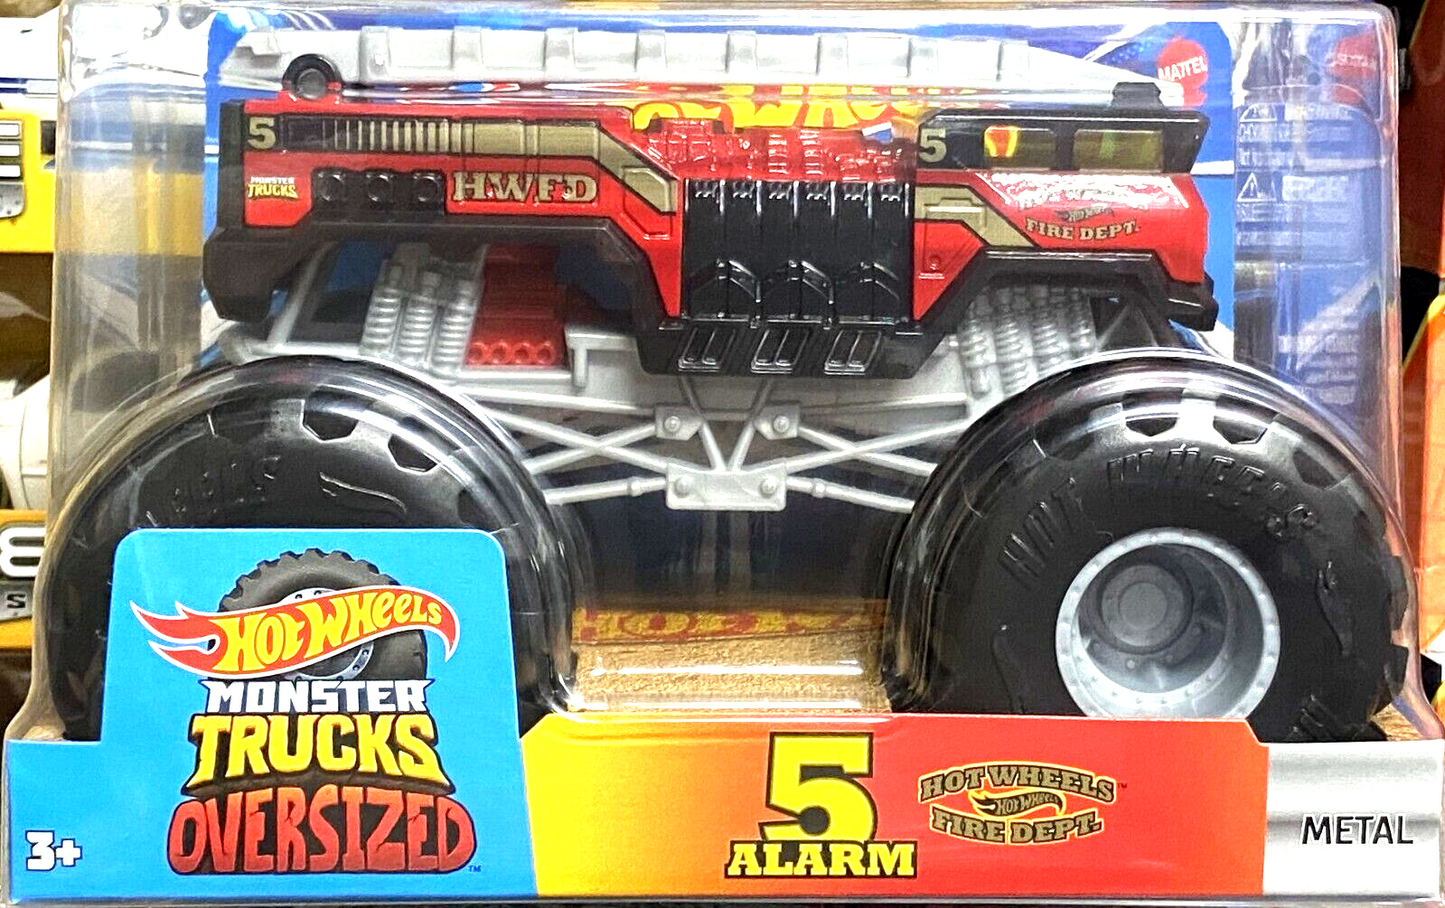 Hot Wheels Monster Trucks 1:24 Scale 2023 Mix 10 Vehicle Case of 4